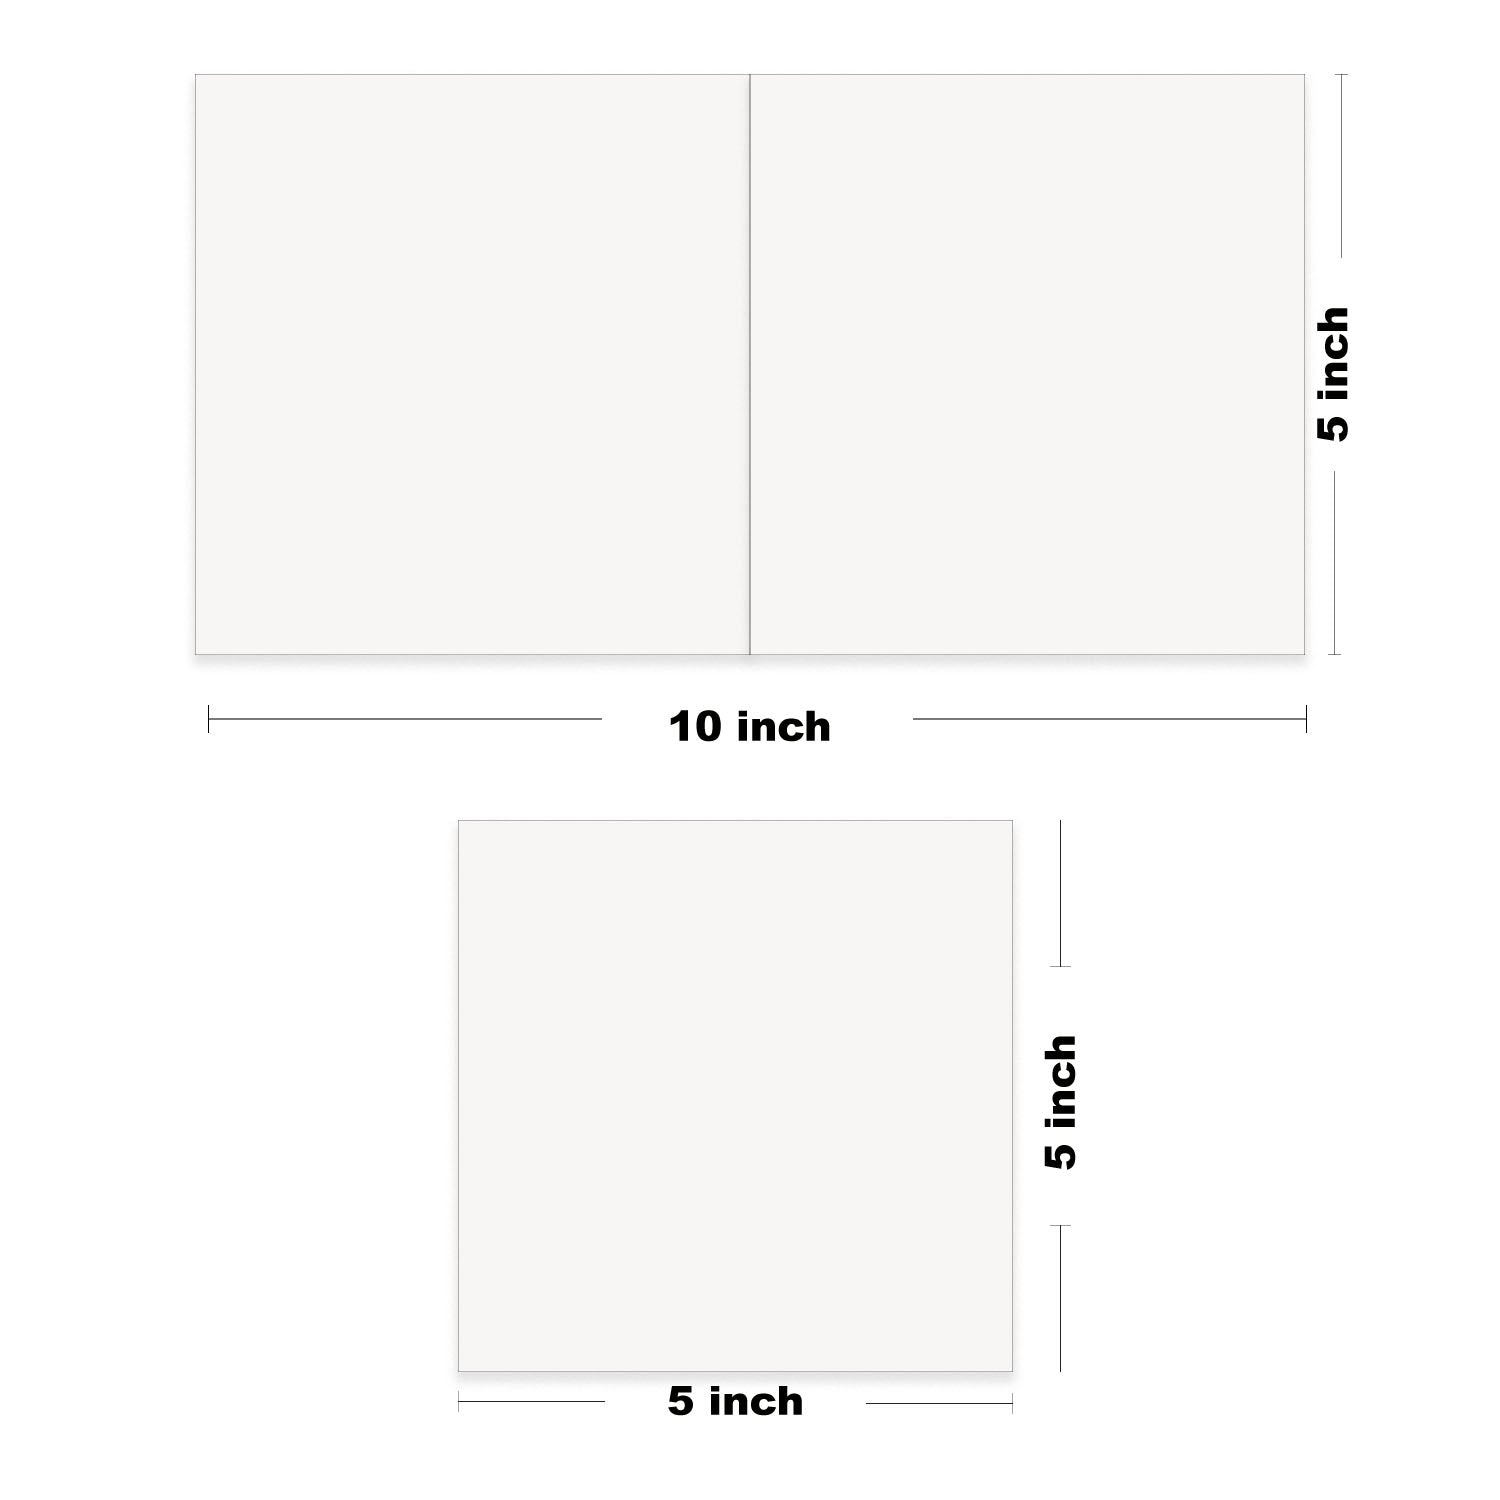 Blank 5 inch square FOLDED Invitation Cards for DIY greeting cards ...